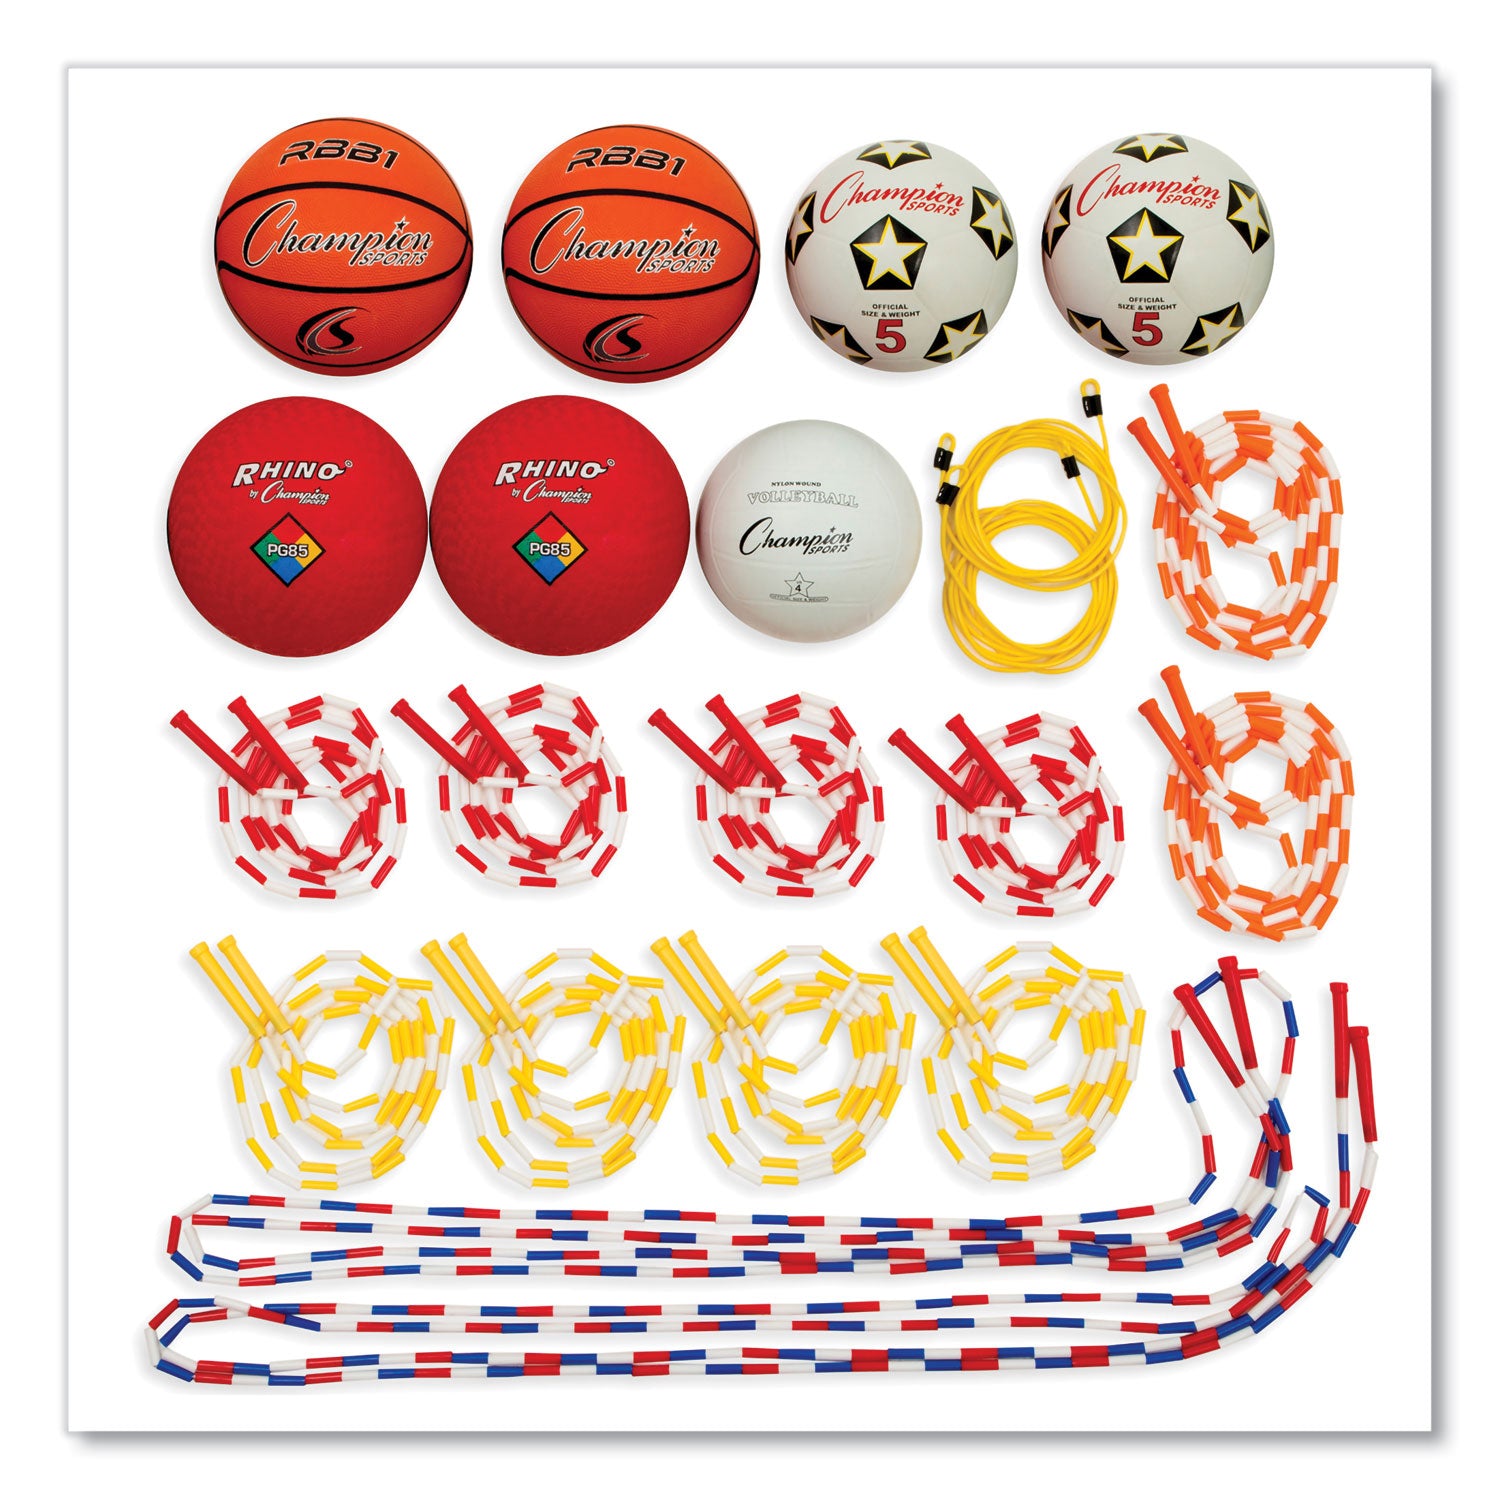 Physical Education Kit with 7 Balls, 14 Jump Ropes, Assorted Colors - 